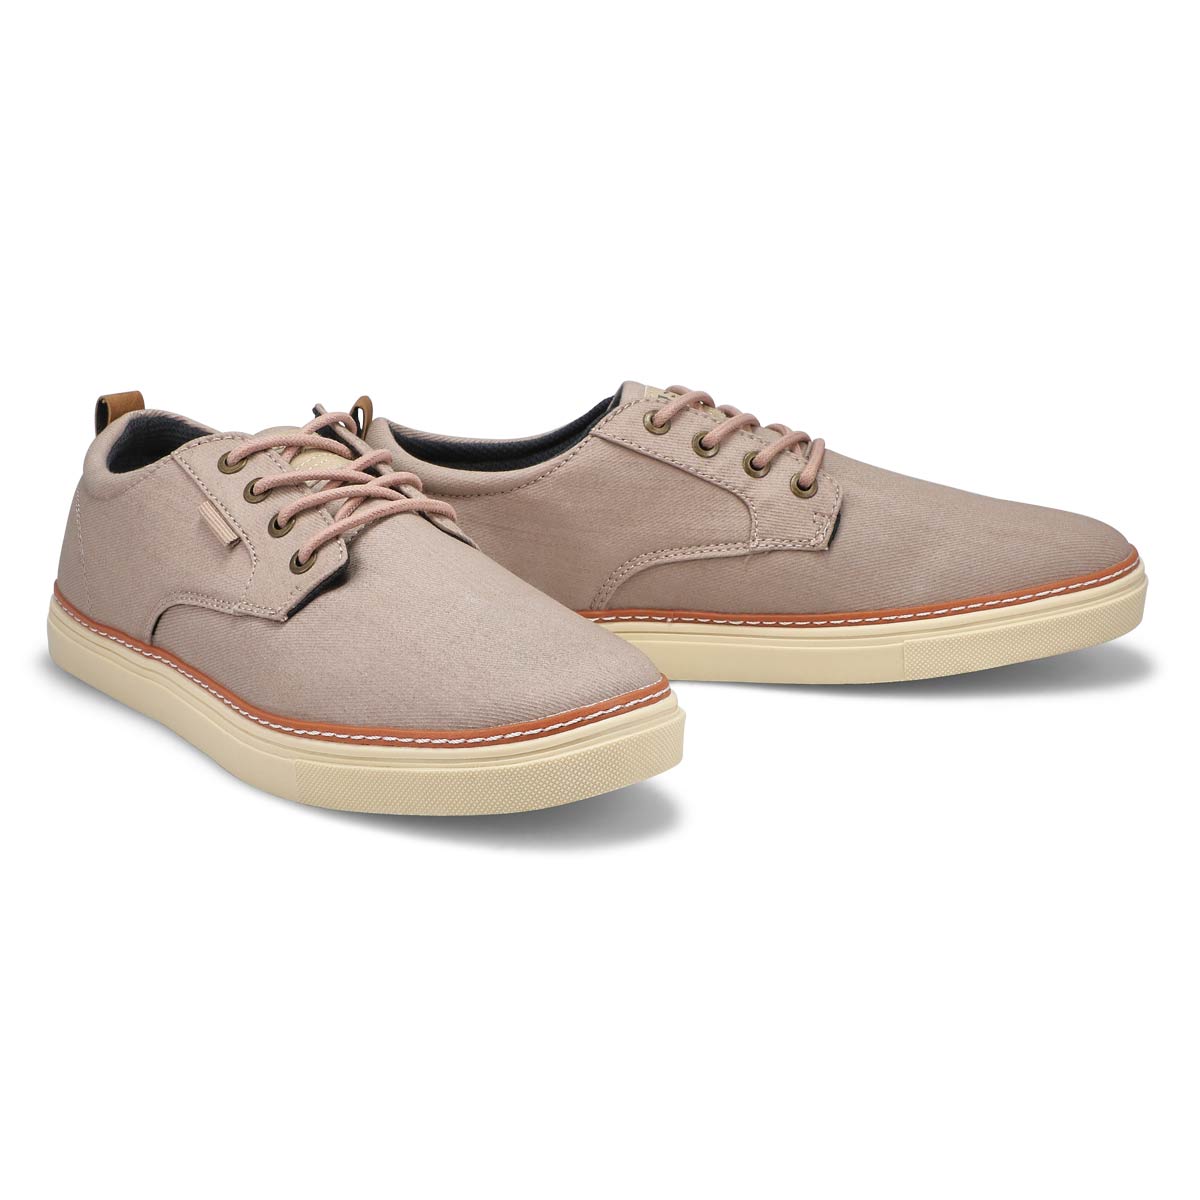 Men's Beasley Canvas Casual Oxford - Taupe